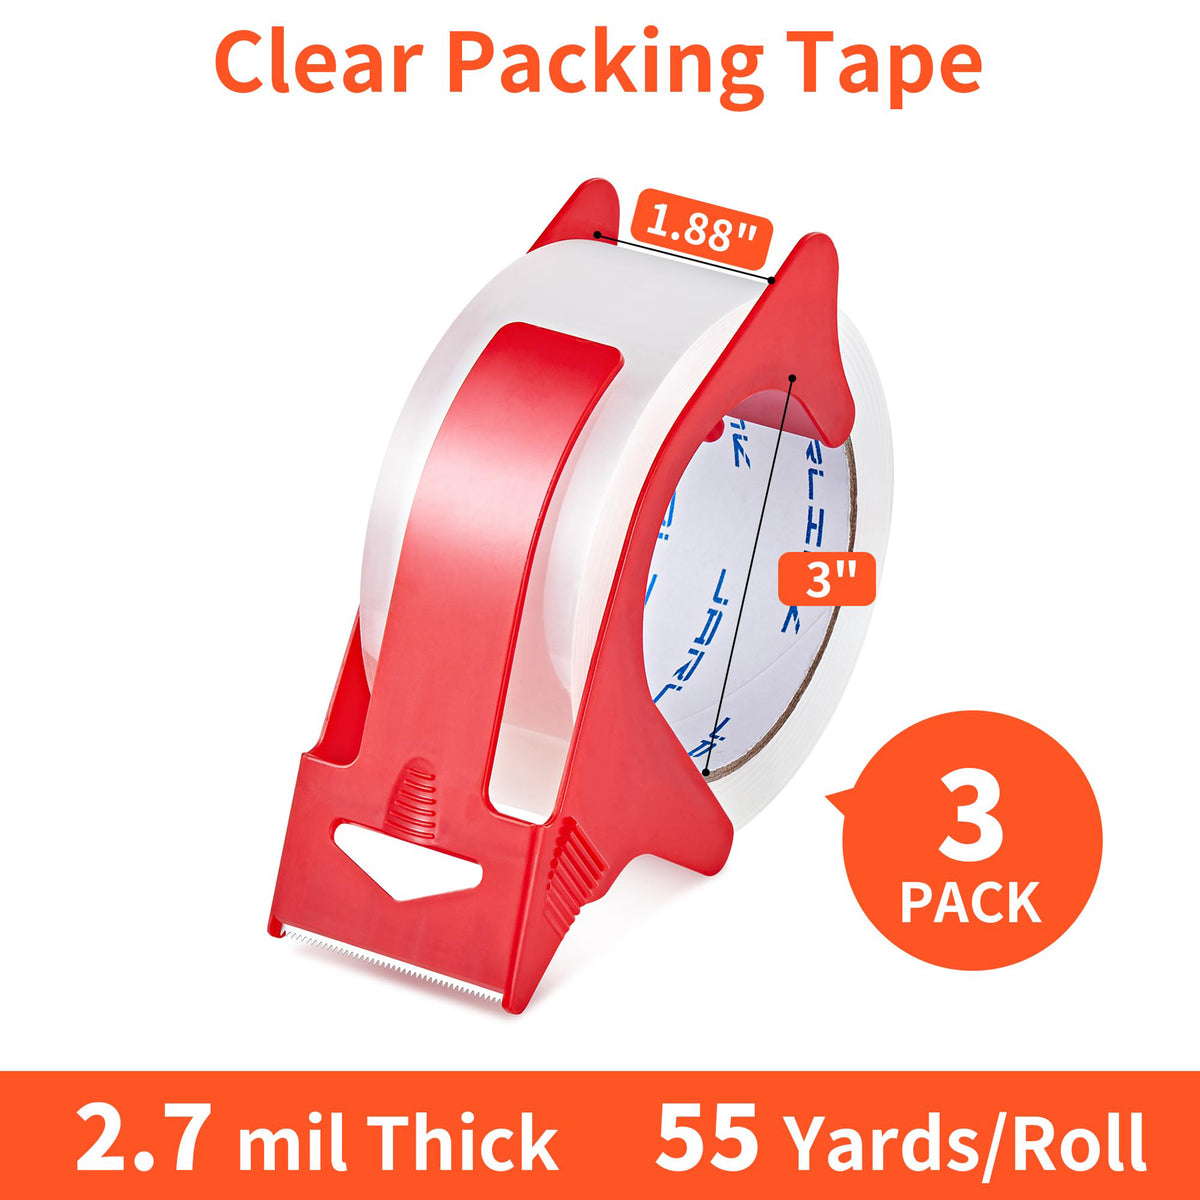 JARLINK Packing Tape Dispenser Gun (2 Pack) with 2 Rolls Tape, 2 inche